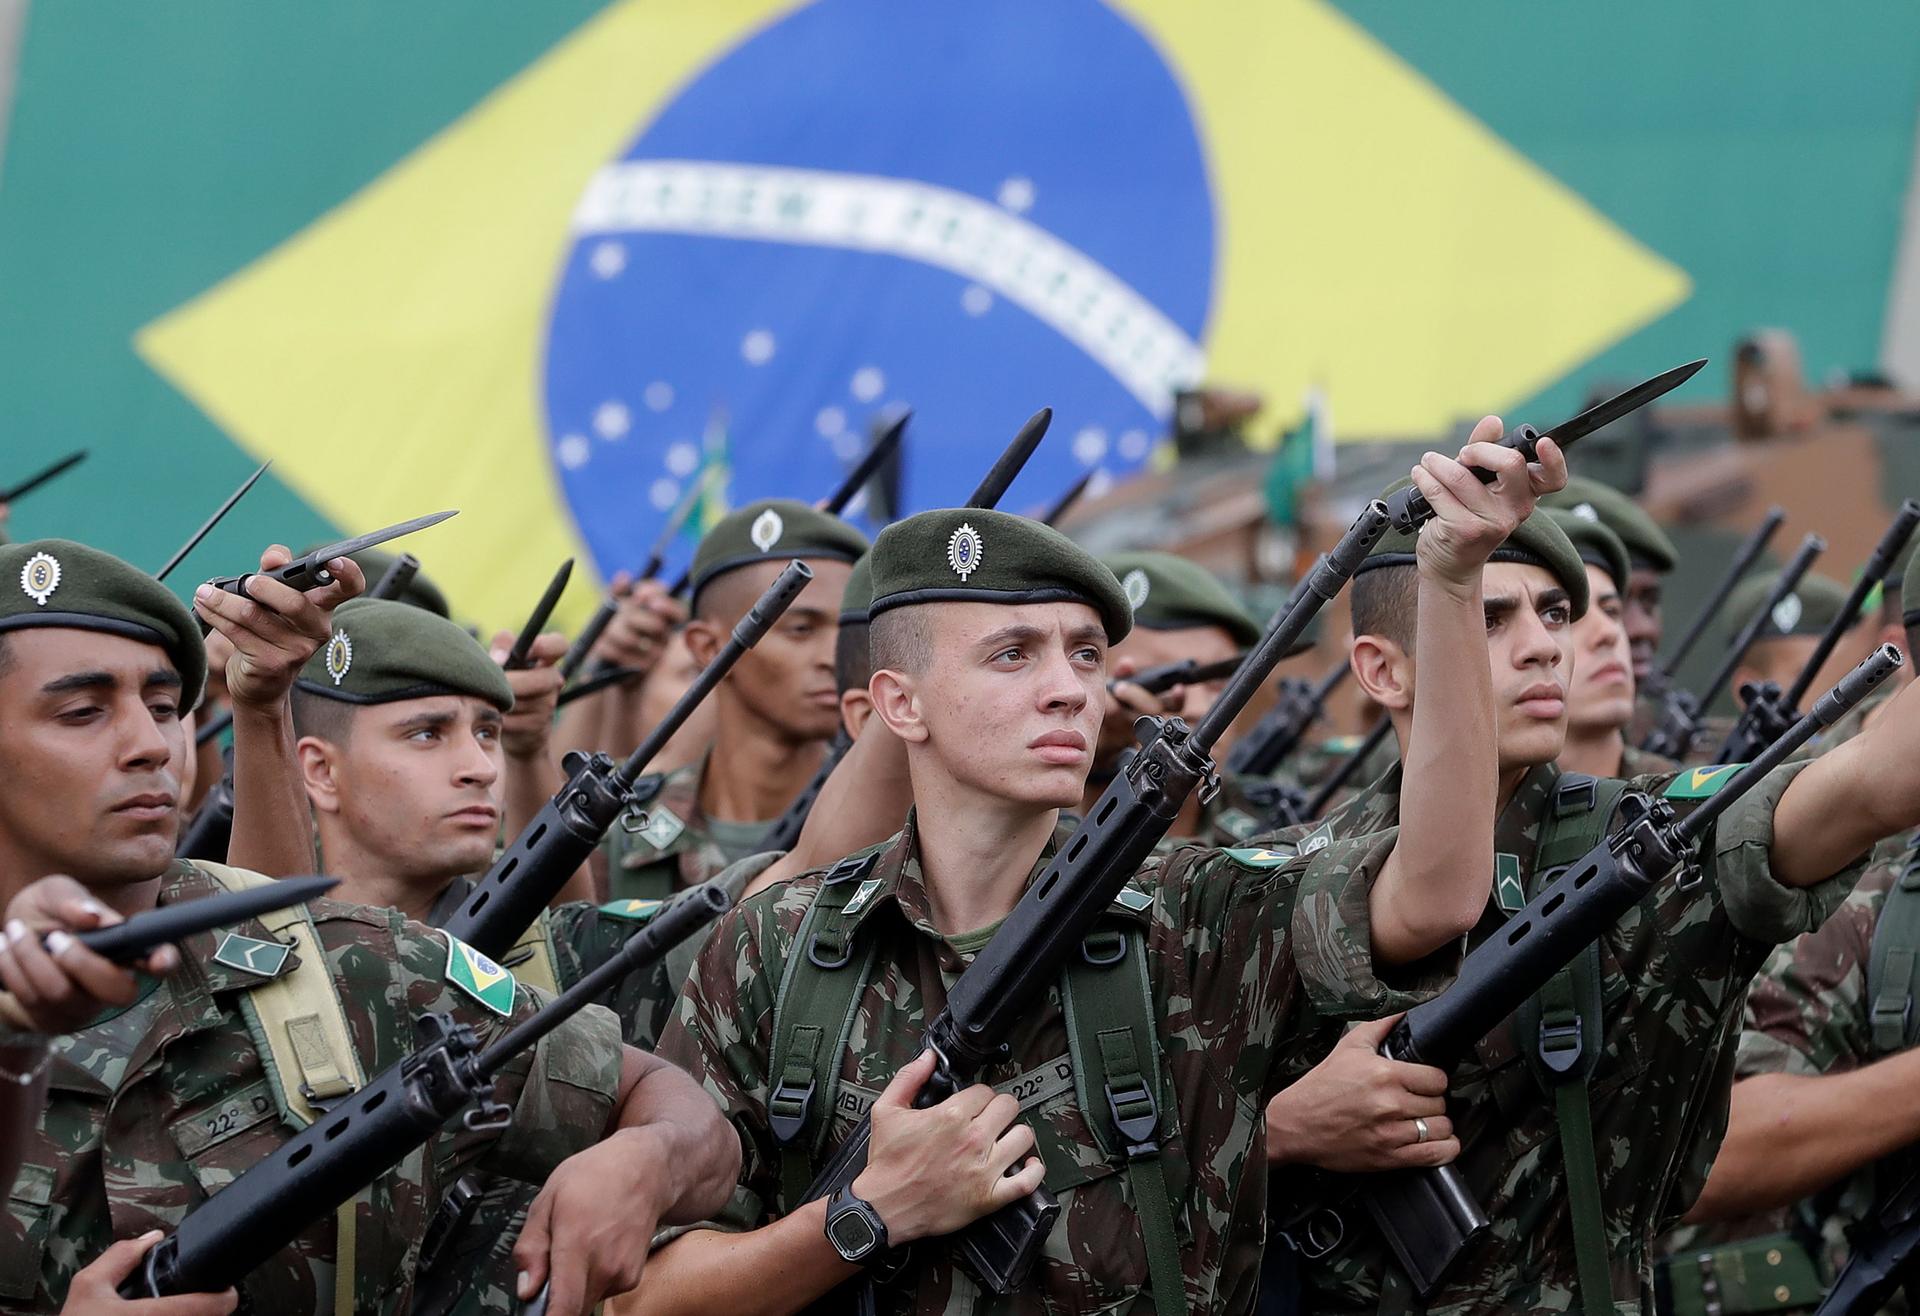 Armed forces take part in a ceremony to commemorate the 1964 military coup that began the last Brazilian dictatorship, in São Paulo, Brazil, Thursday, March 28, 2019. 